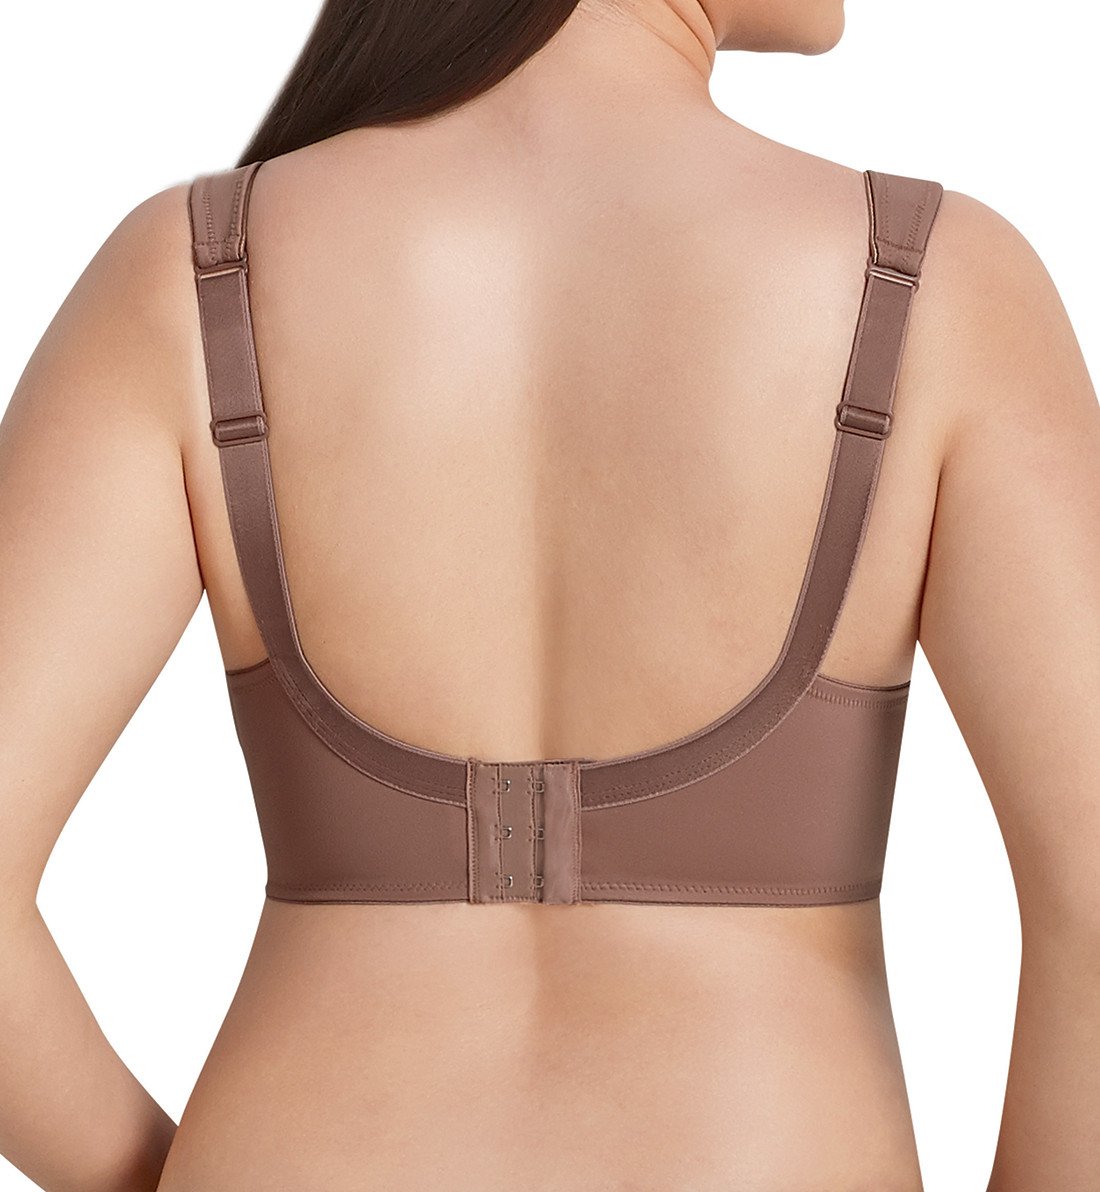 Rosa Faia by Anita Twin Seamless Underwire Bra (5490),30D,Deep Taupe - Deep Taupe,30D